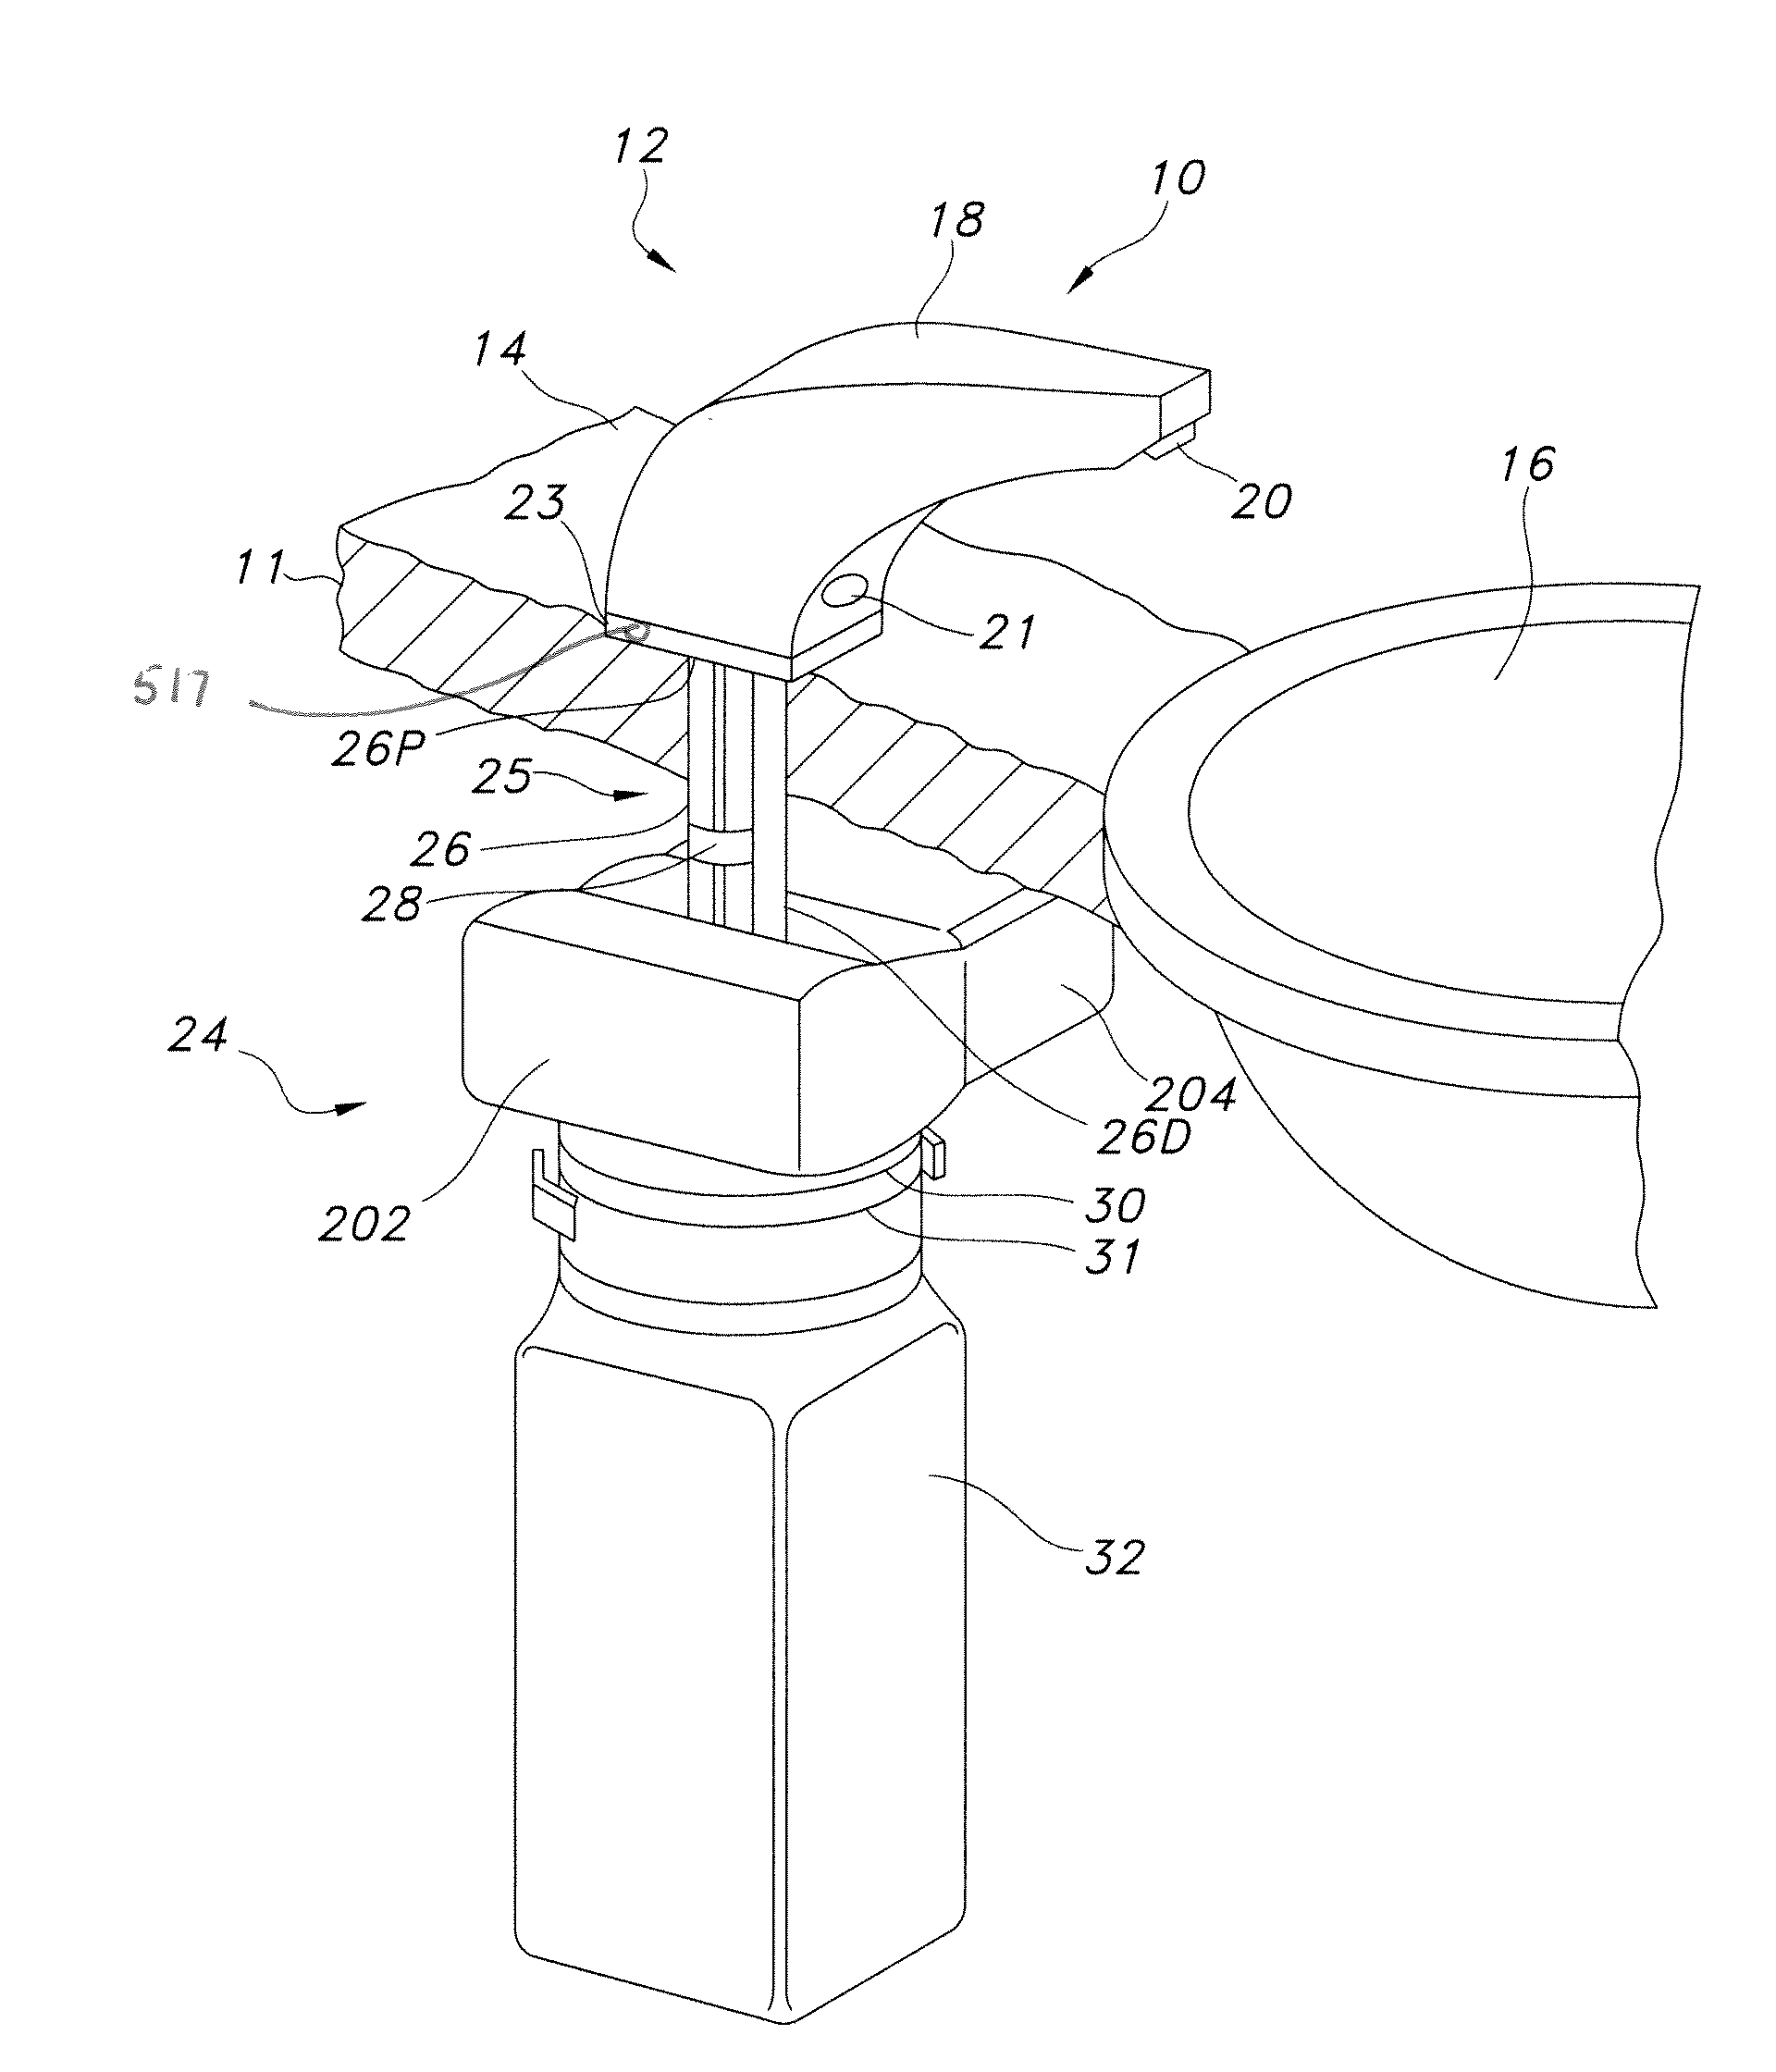 Fluid Dispenser with Cleaning/Maintenance Mode